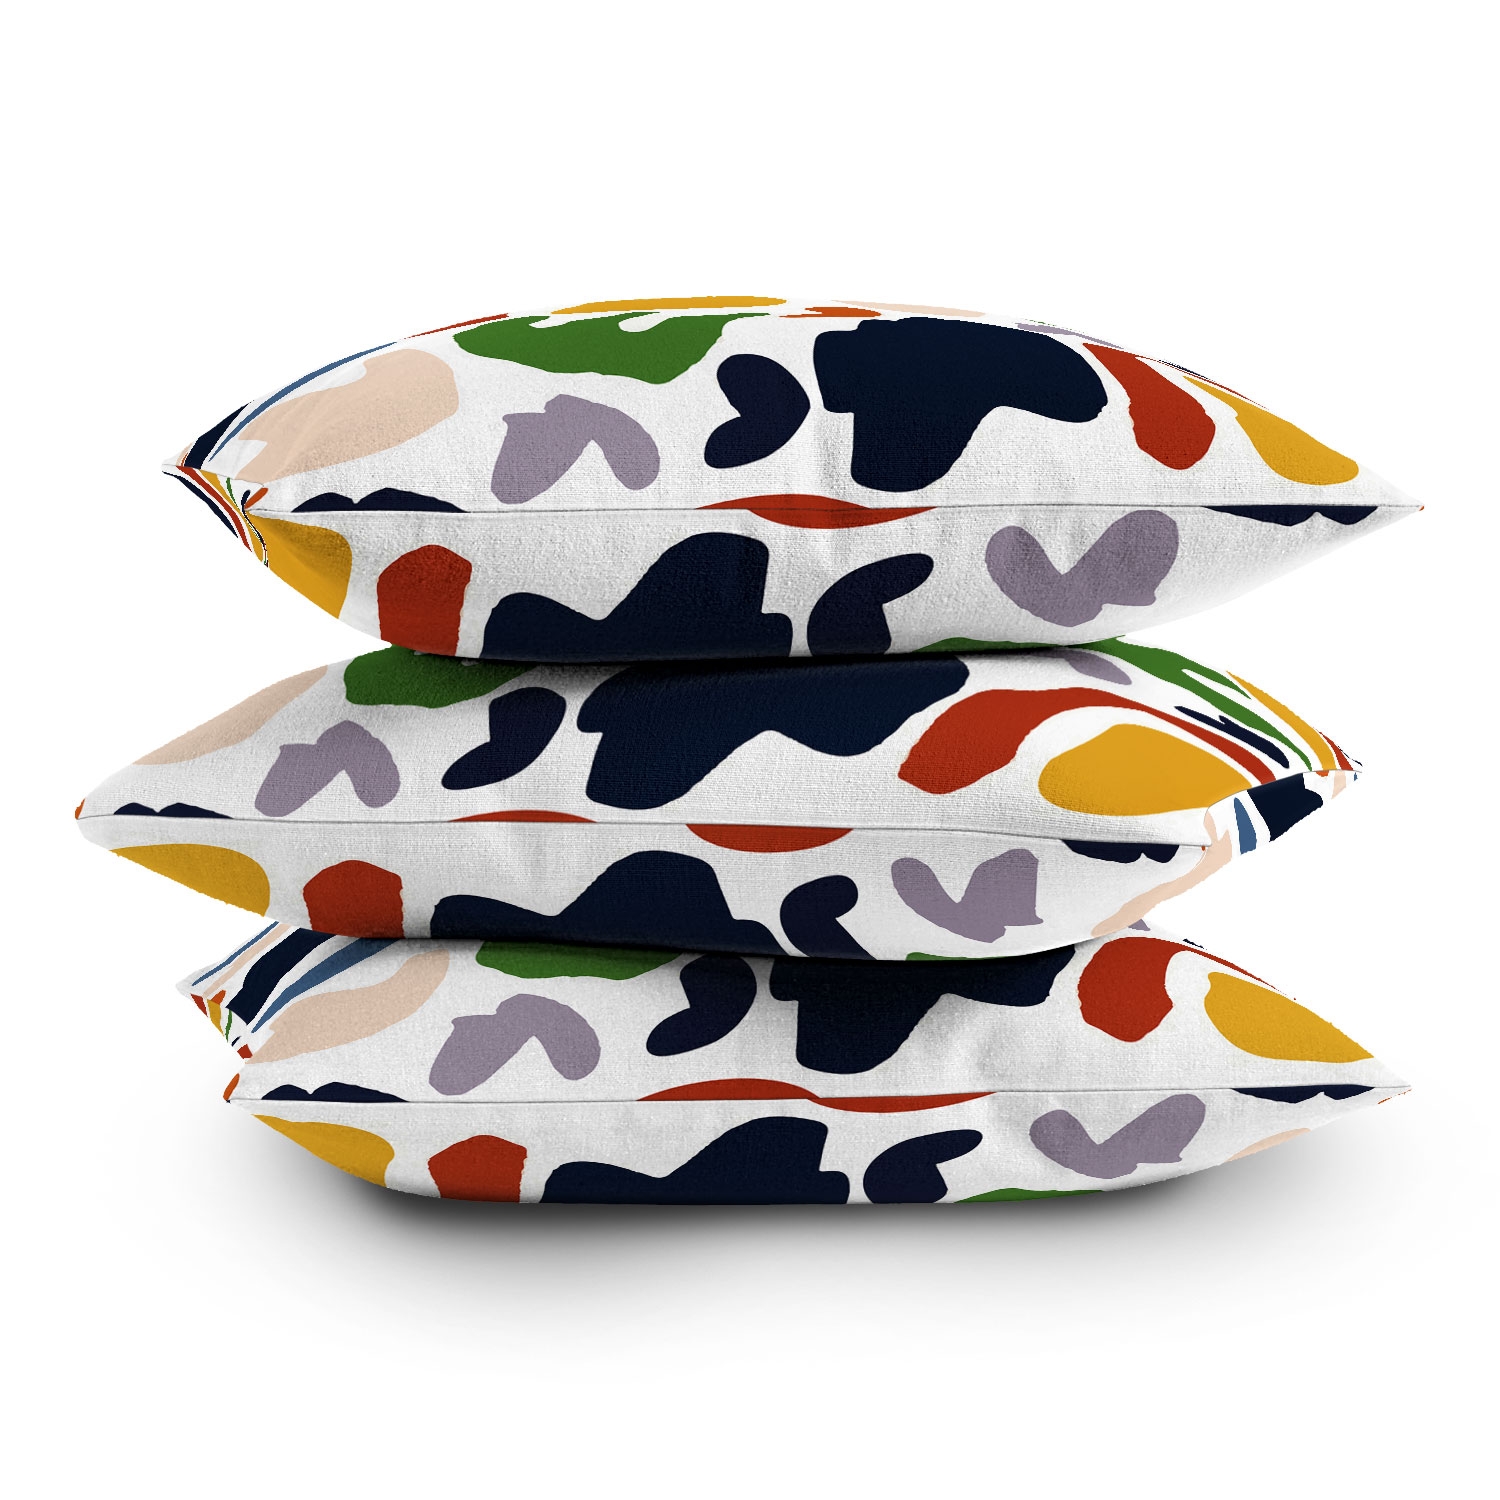 Cut Out Shapes Vibrant by Mambo Art Studio - Outdoor Throw Pillow 18" x 18" - Image 2